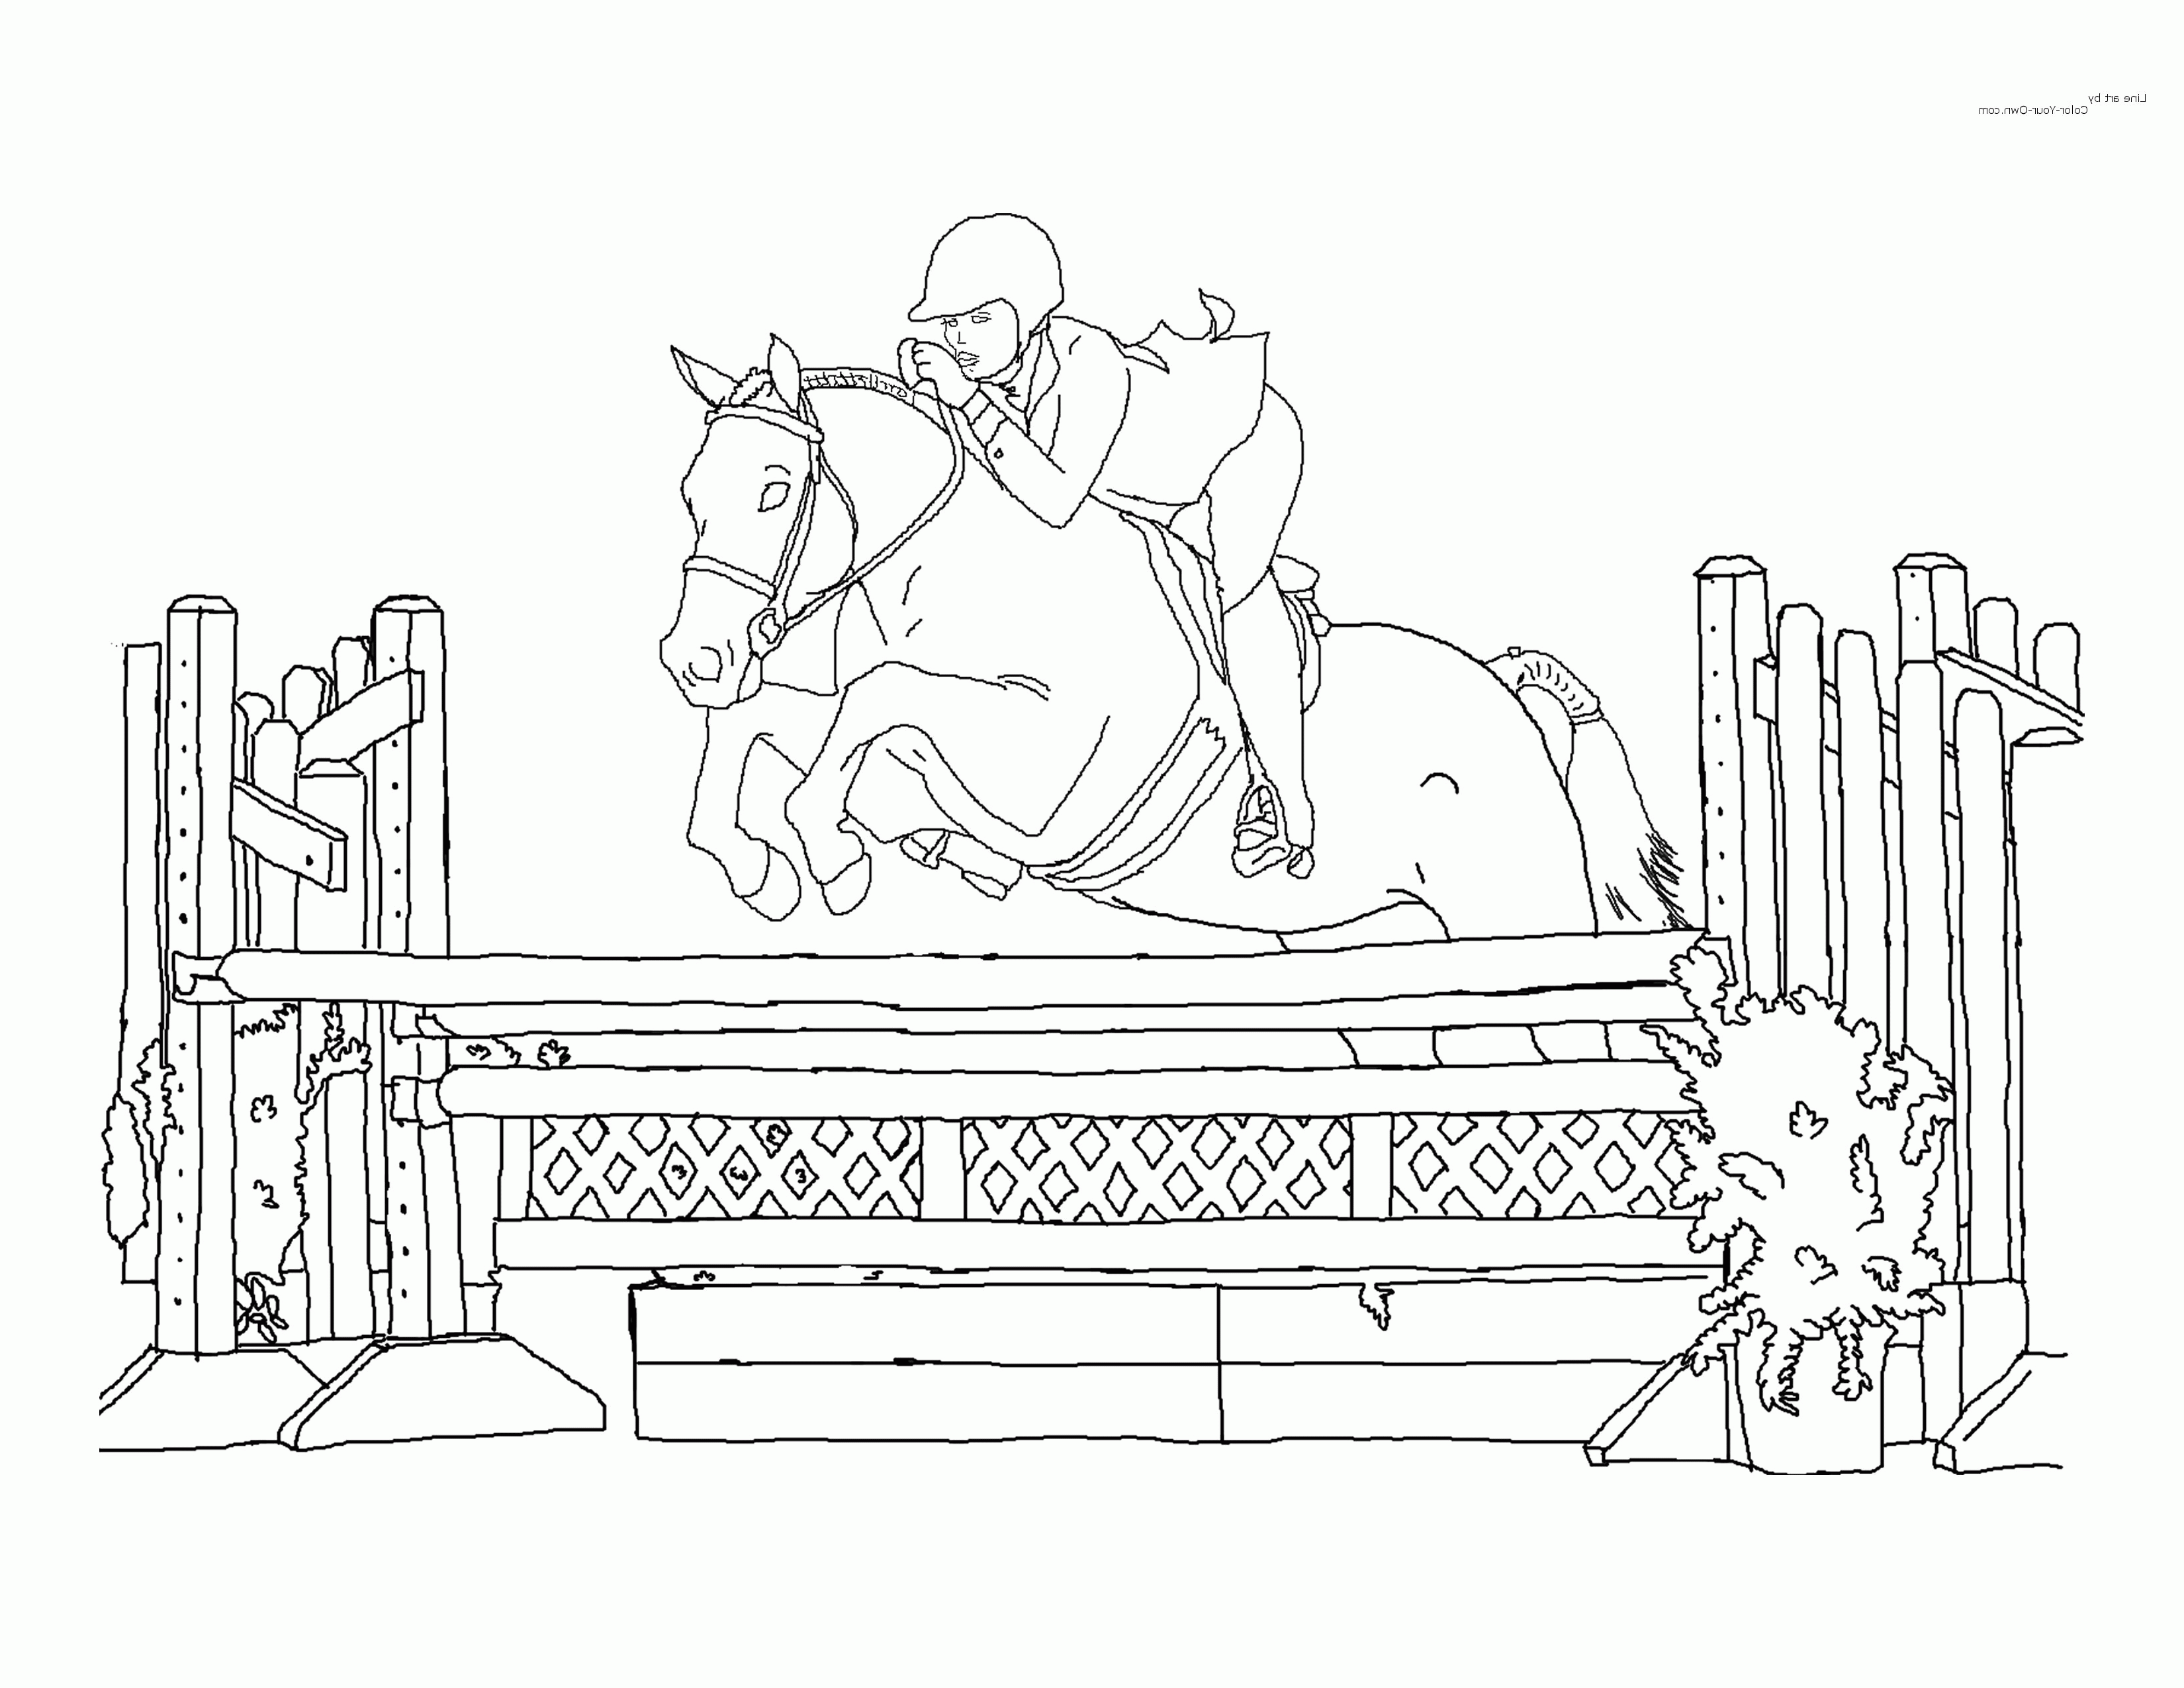 Printable Coloring Pages Horse Show - Coloring Home